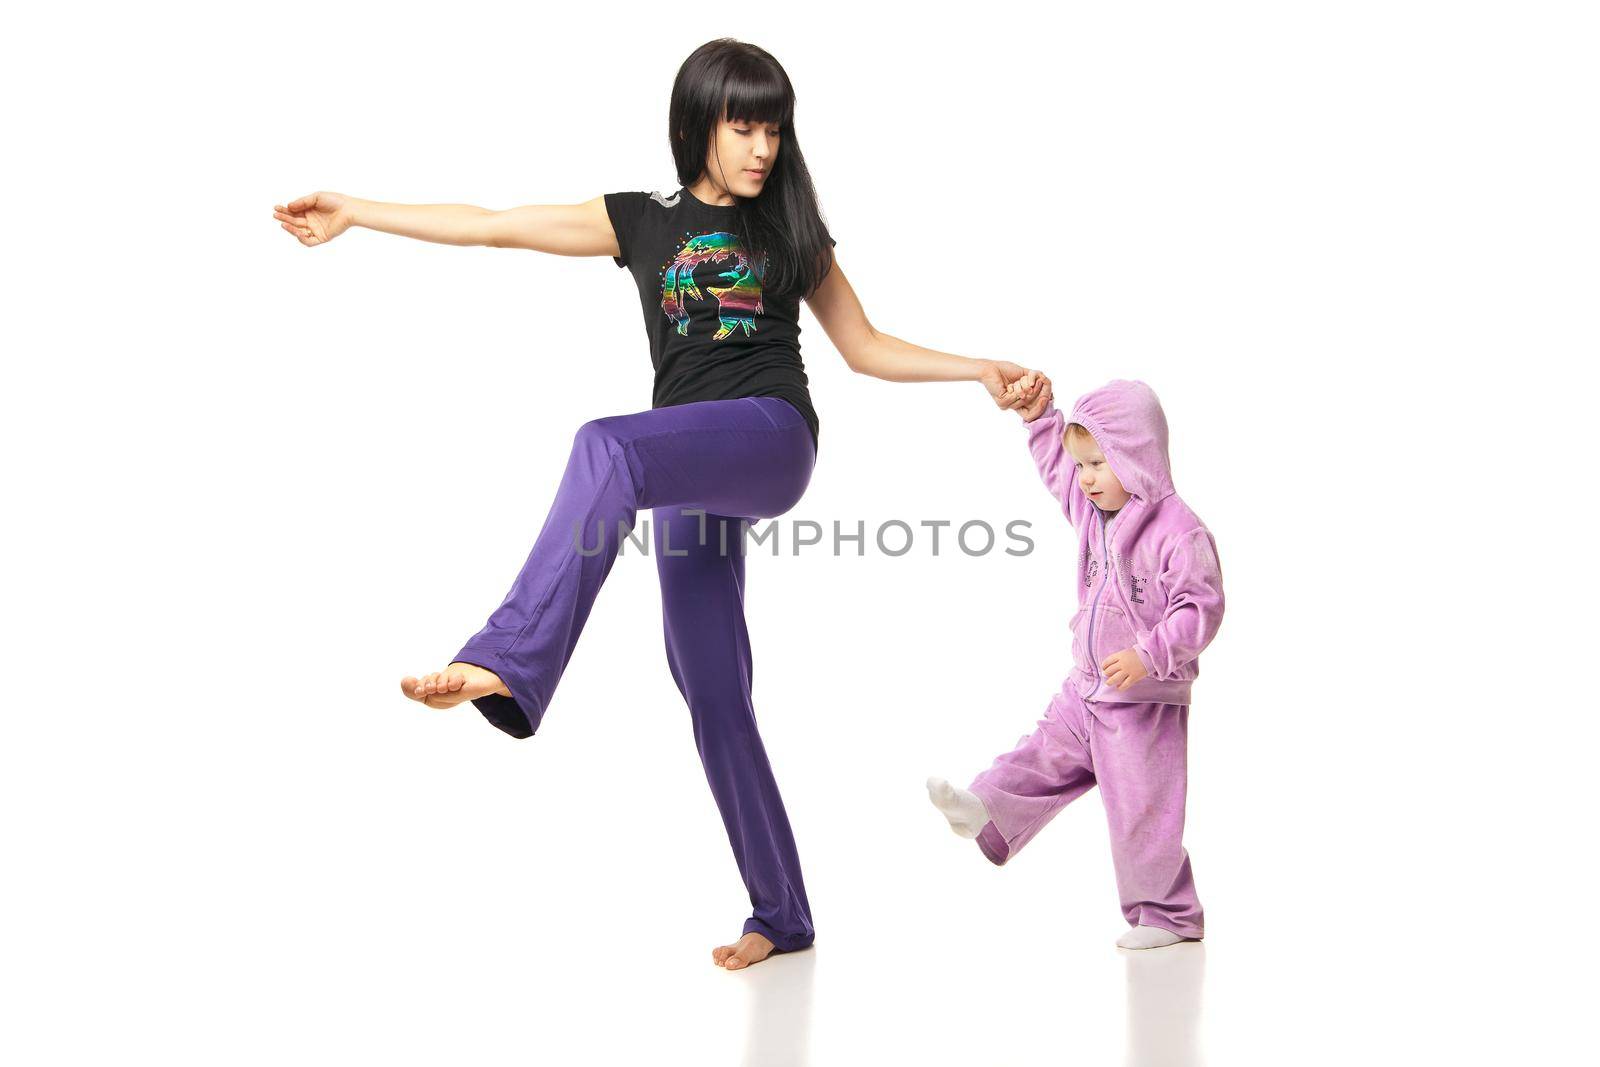 Yoga for woman and child. Mother with the baby doing exercises